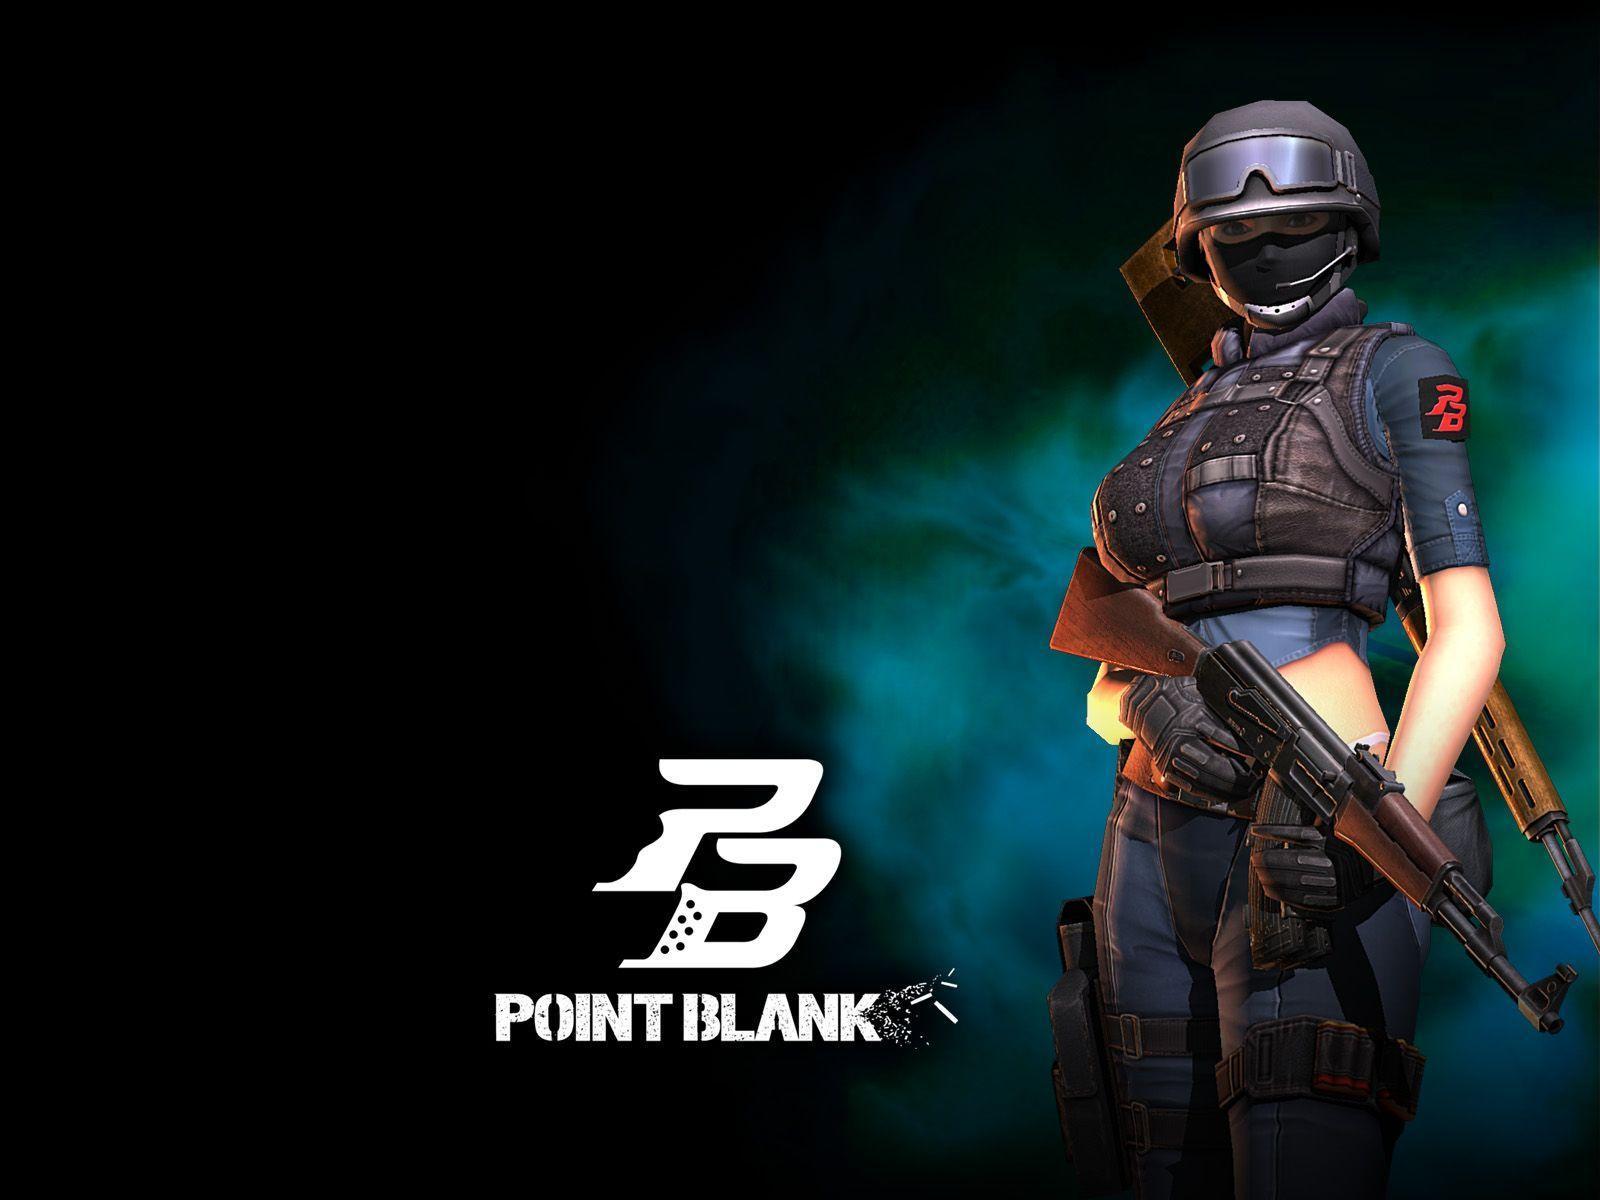 Wallpaper Point Blank Games Image Download